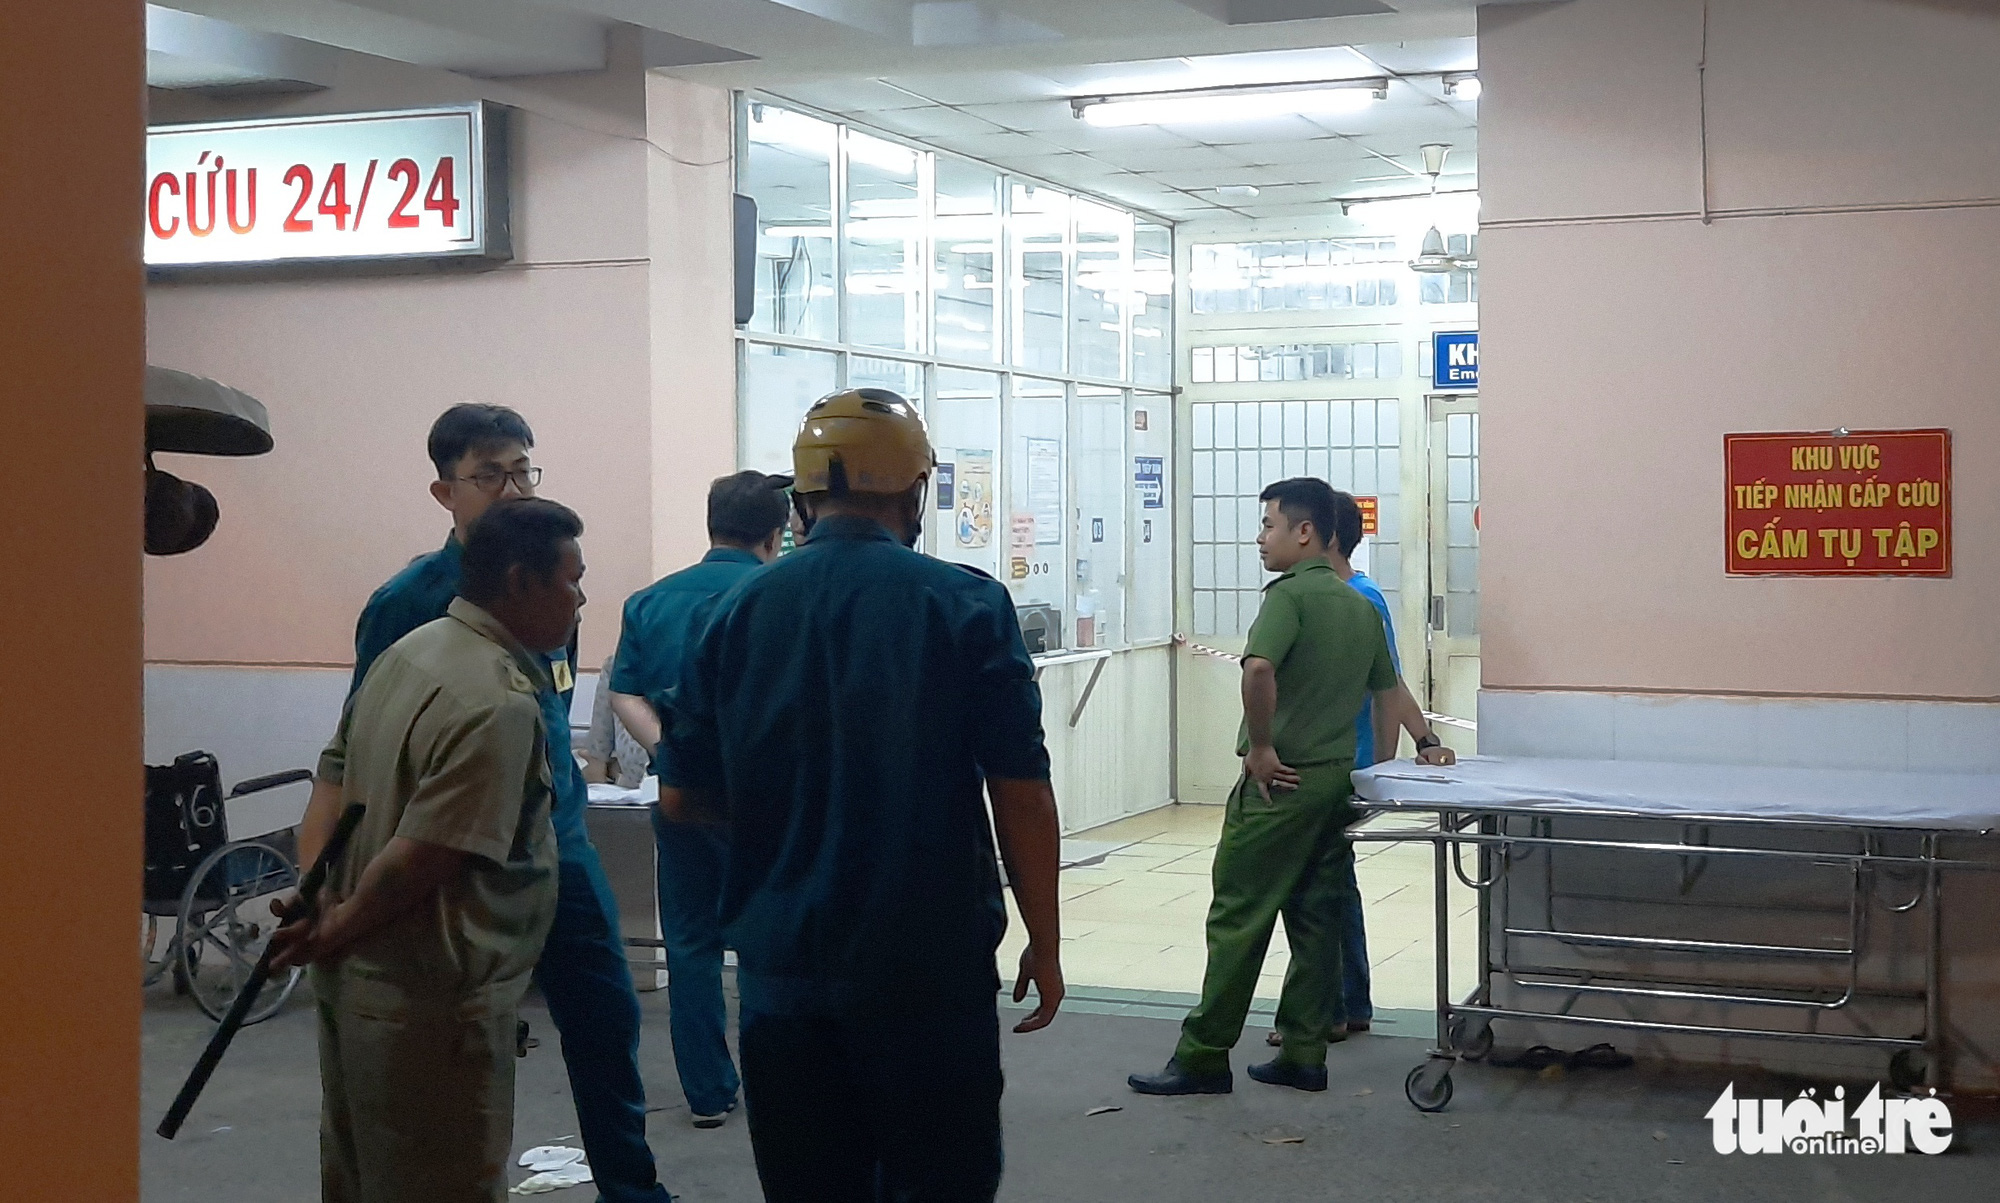 Man attempts suicide by gunshot to head following hospital admission in Ho Chi Minh City